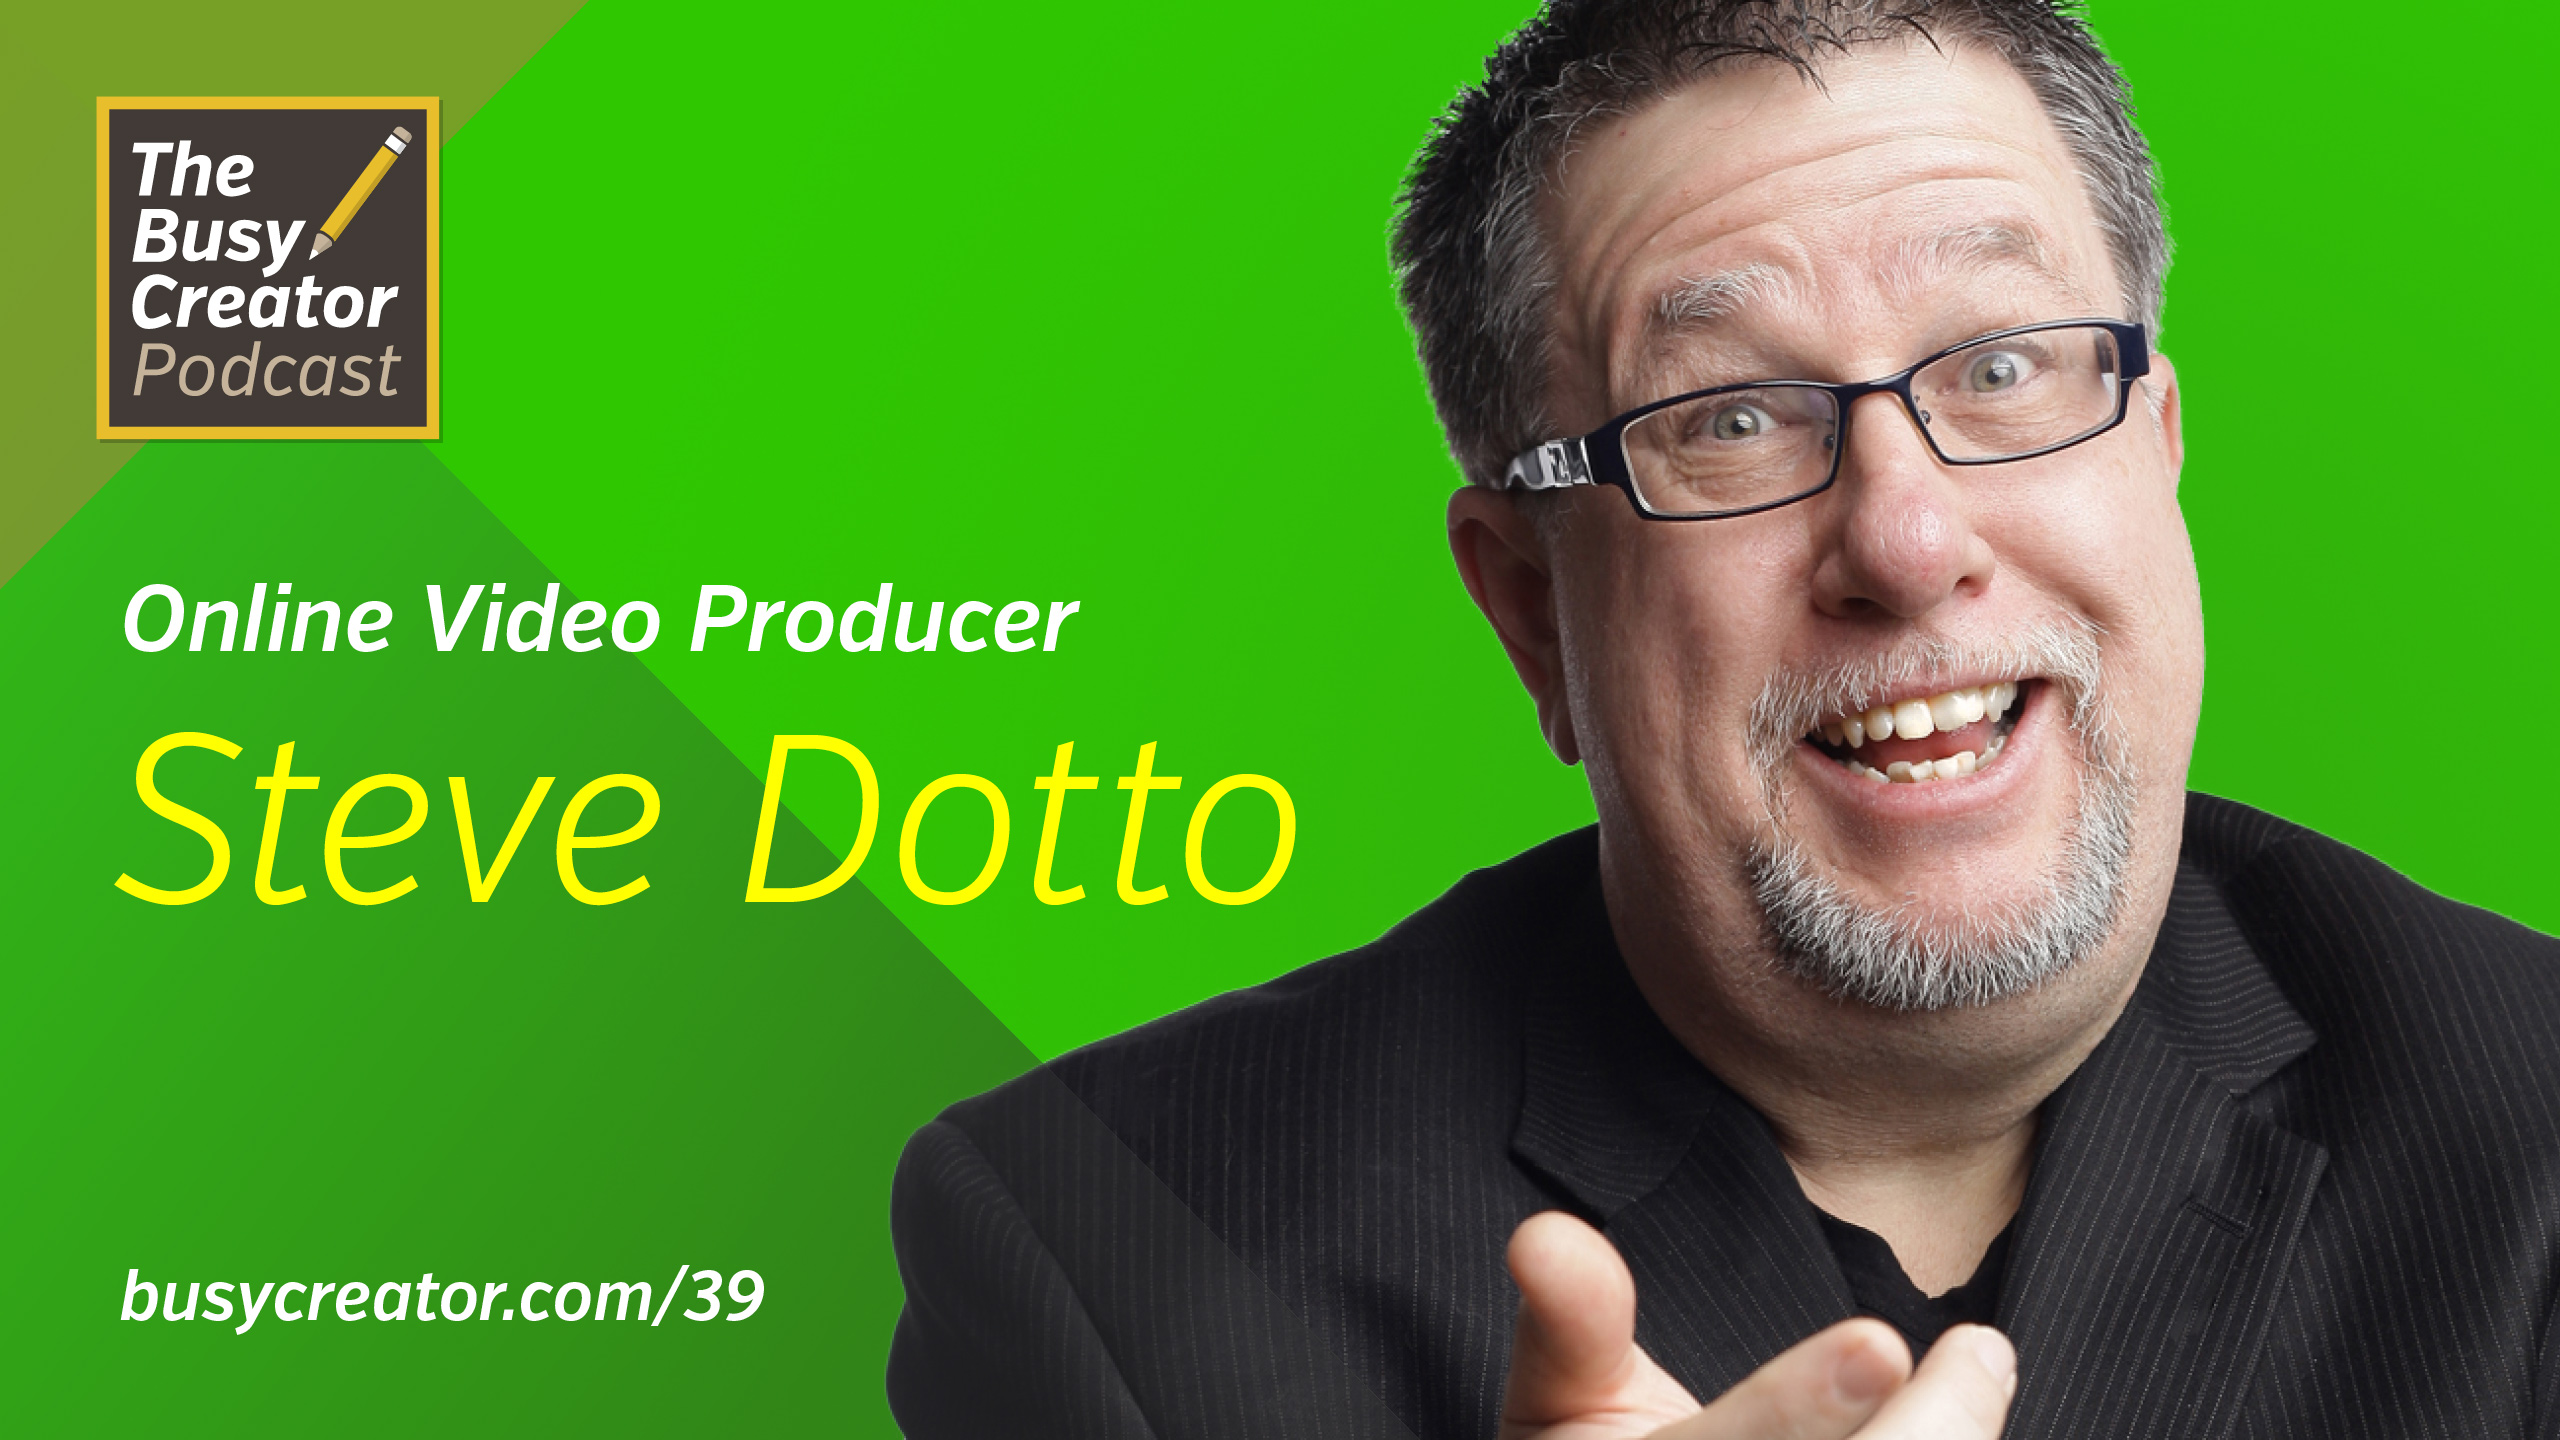 How Steve Dotto Became a Productivity Nerd & Online Video Educator